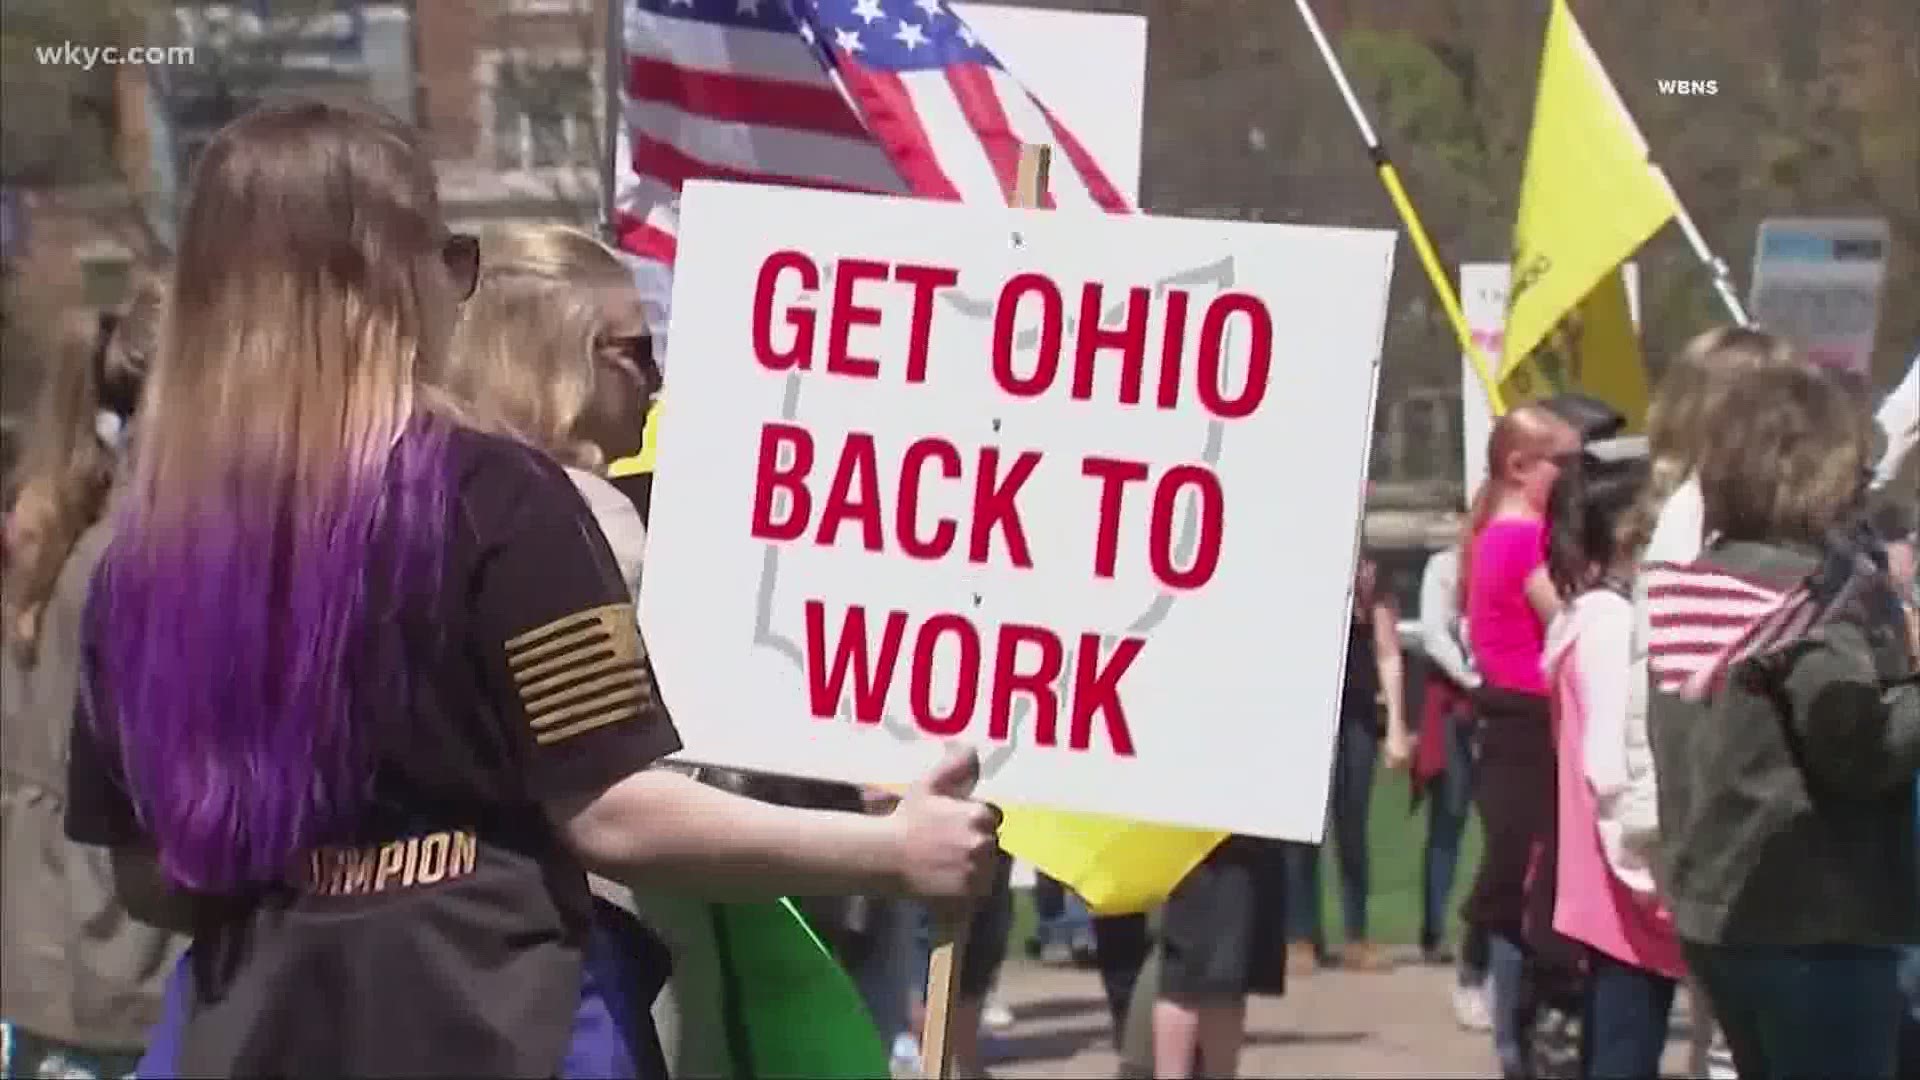 Protesters in Ohio took issue with Governor Mike DeWine's response to the coronavirus pandemic.